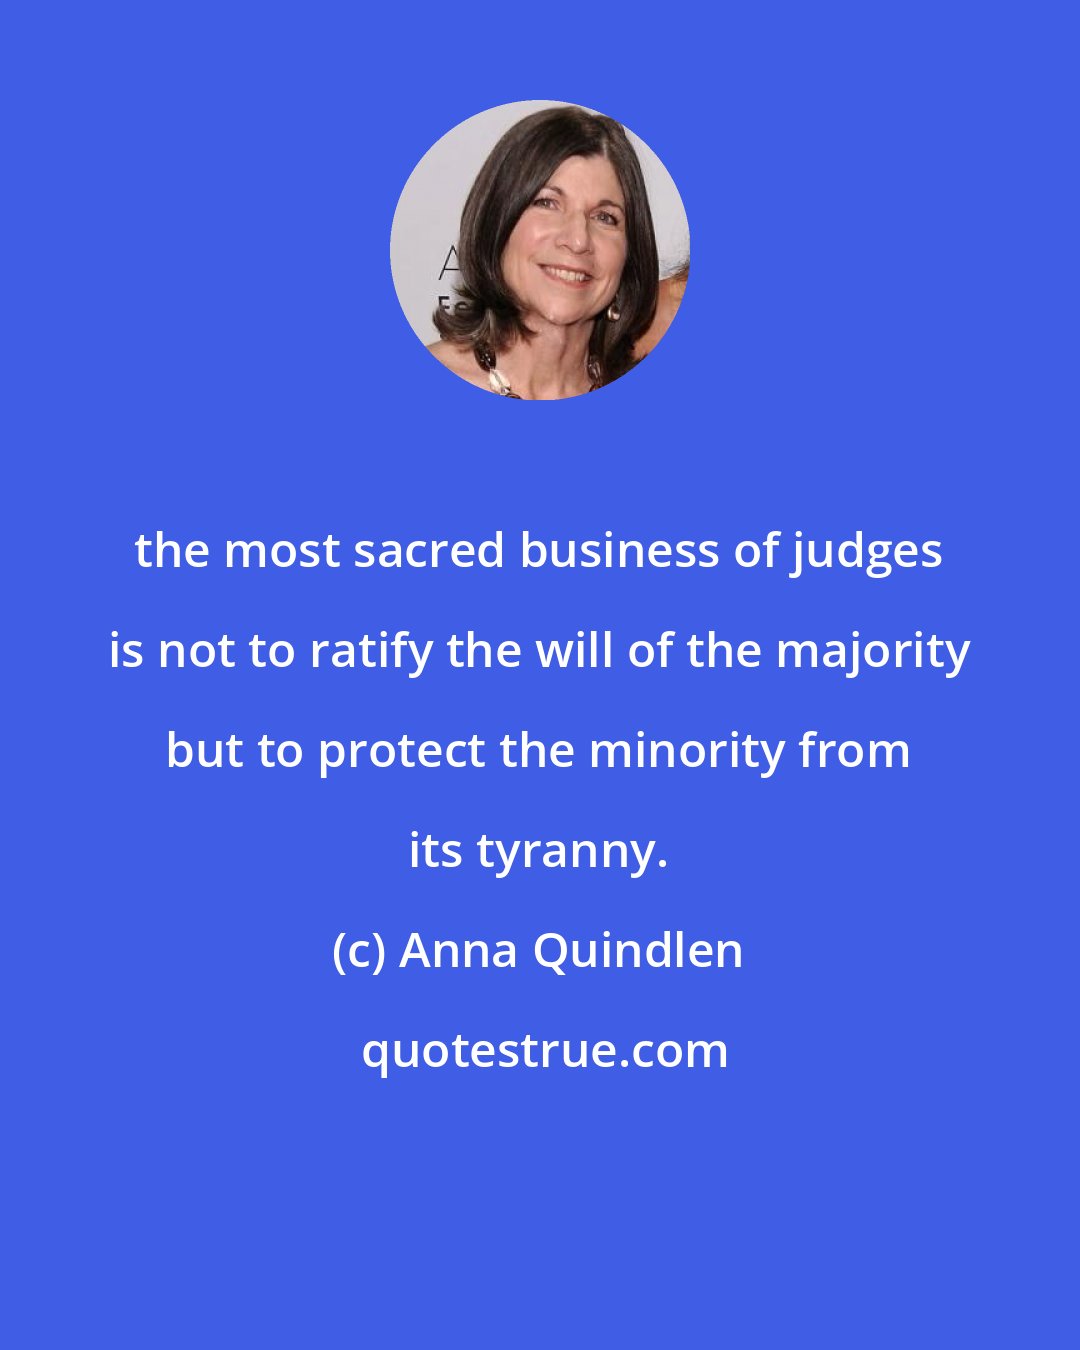 Anna Quindlen: the most sacred business of judges is not to ratify the will of the majority but to protect the minority from its tyranny.